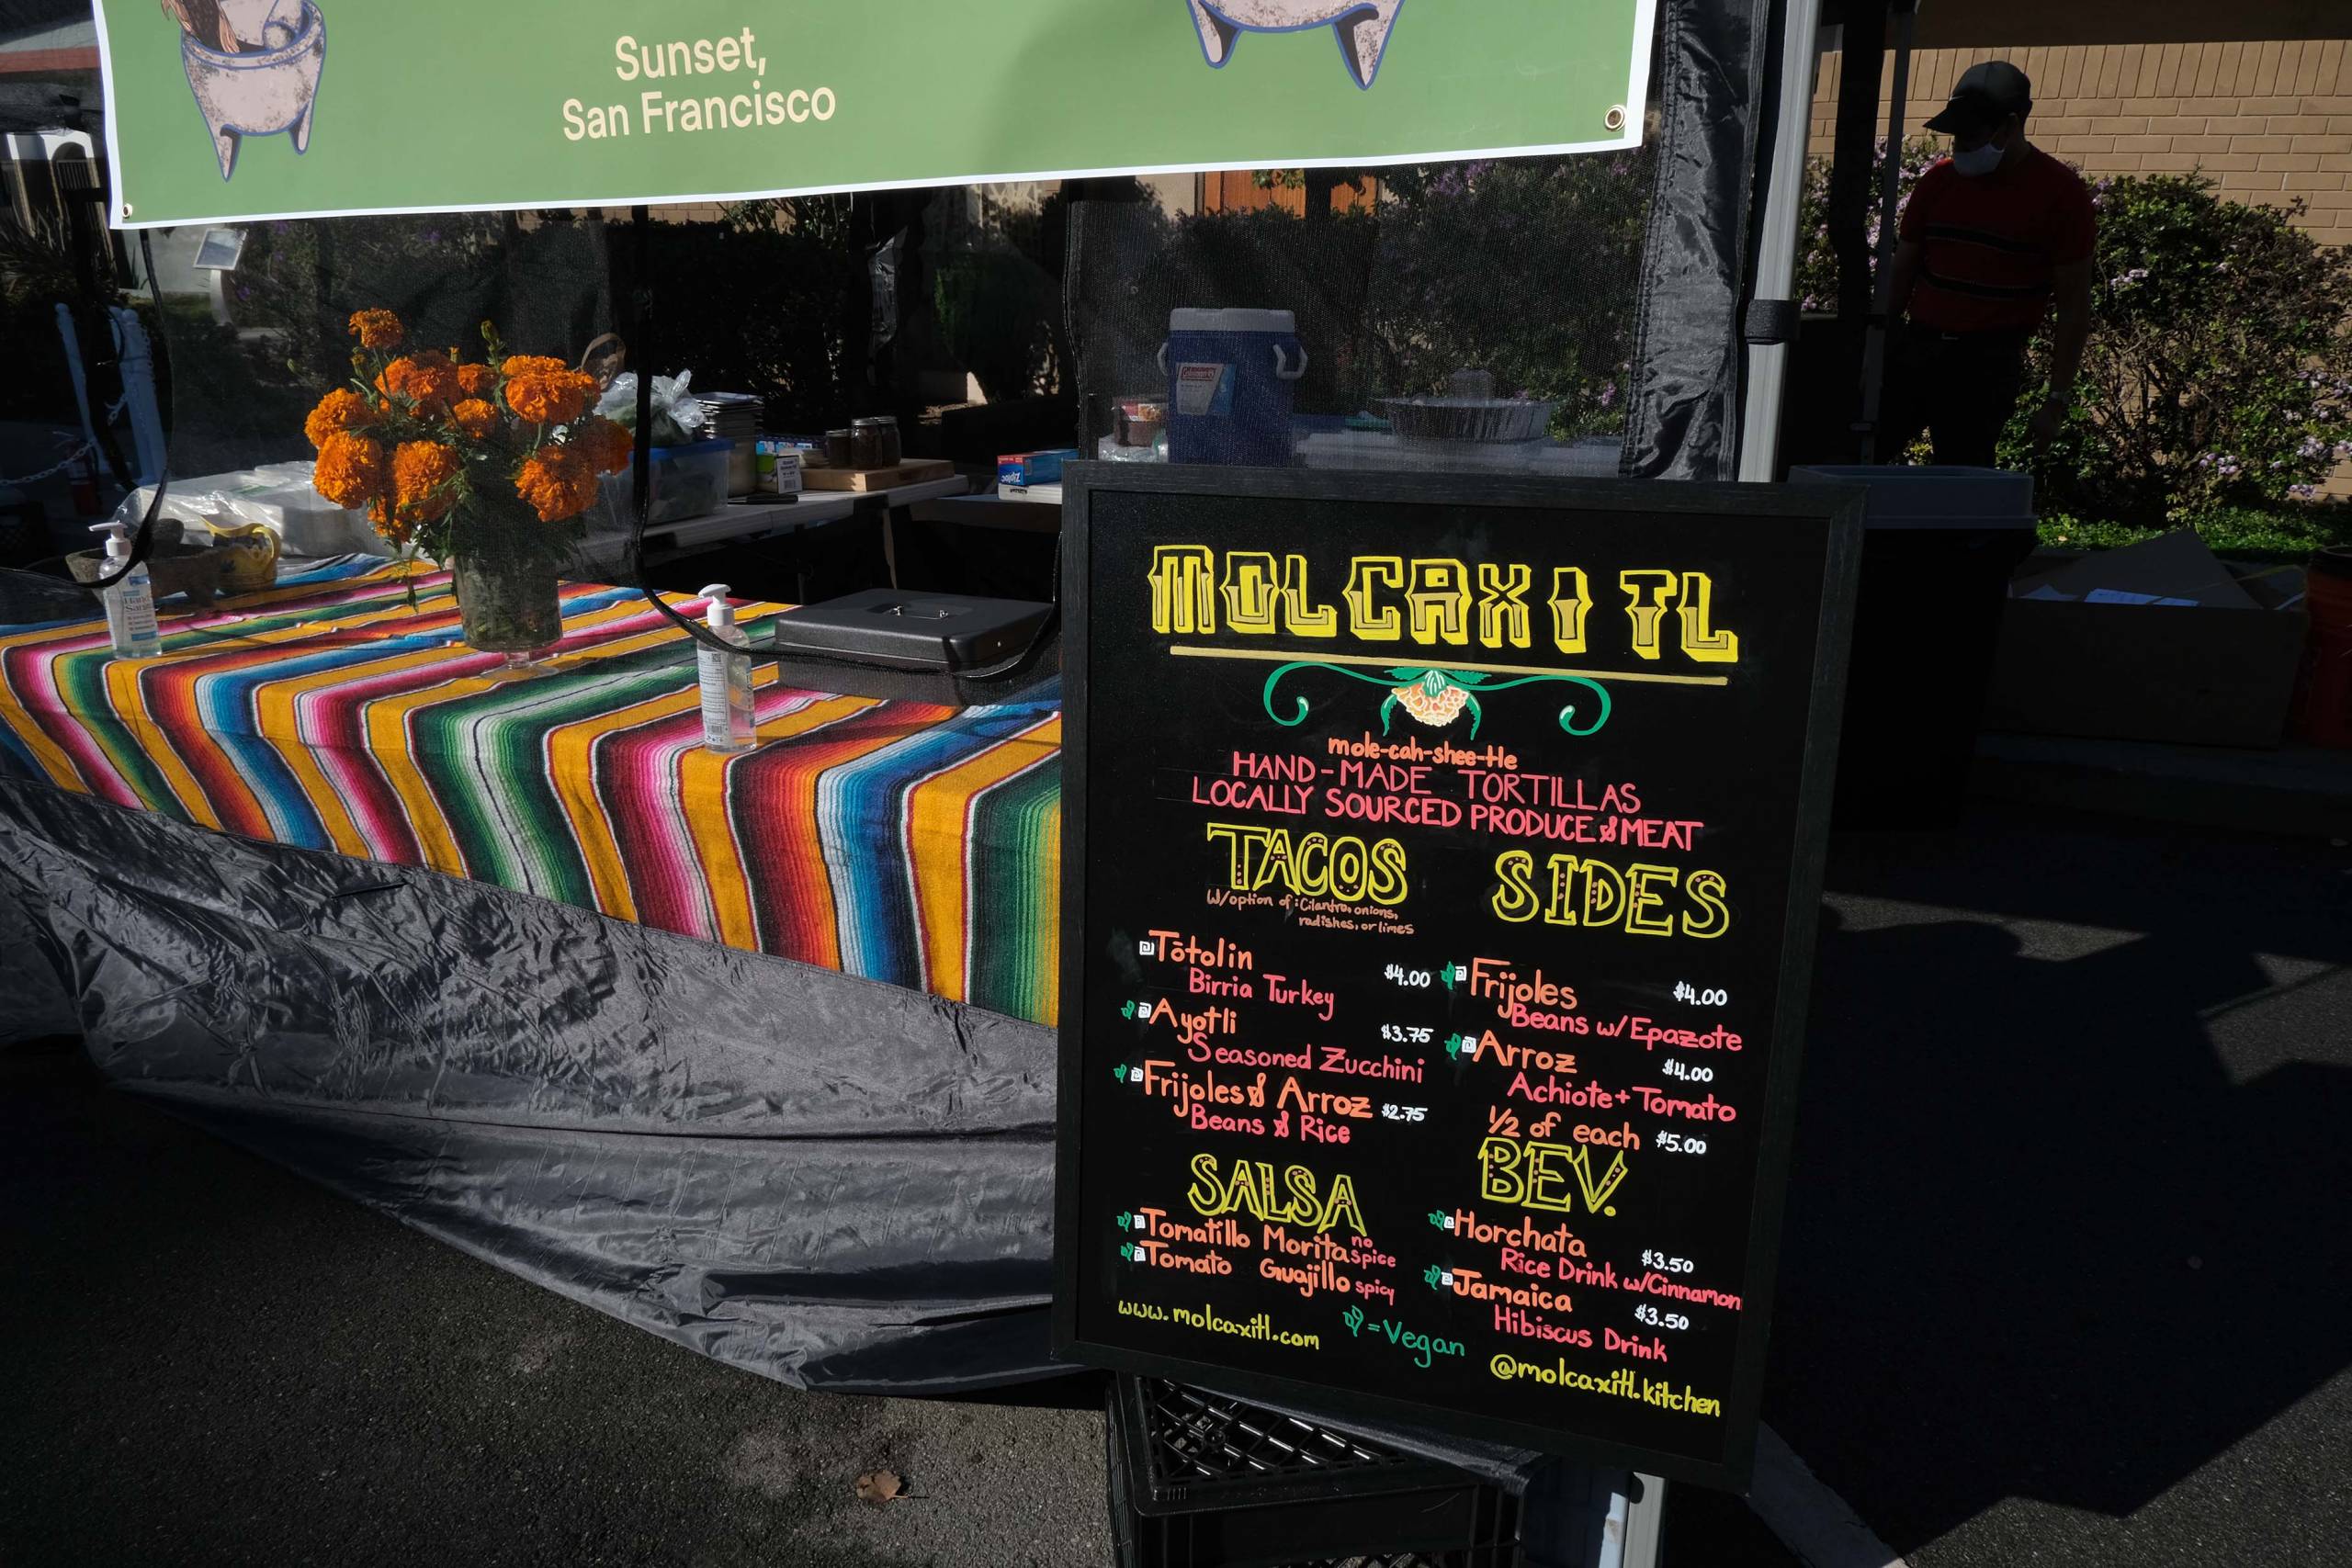 The menu board for Molcaxitl set up in front of the Outer Sunset farmers market stand